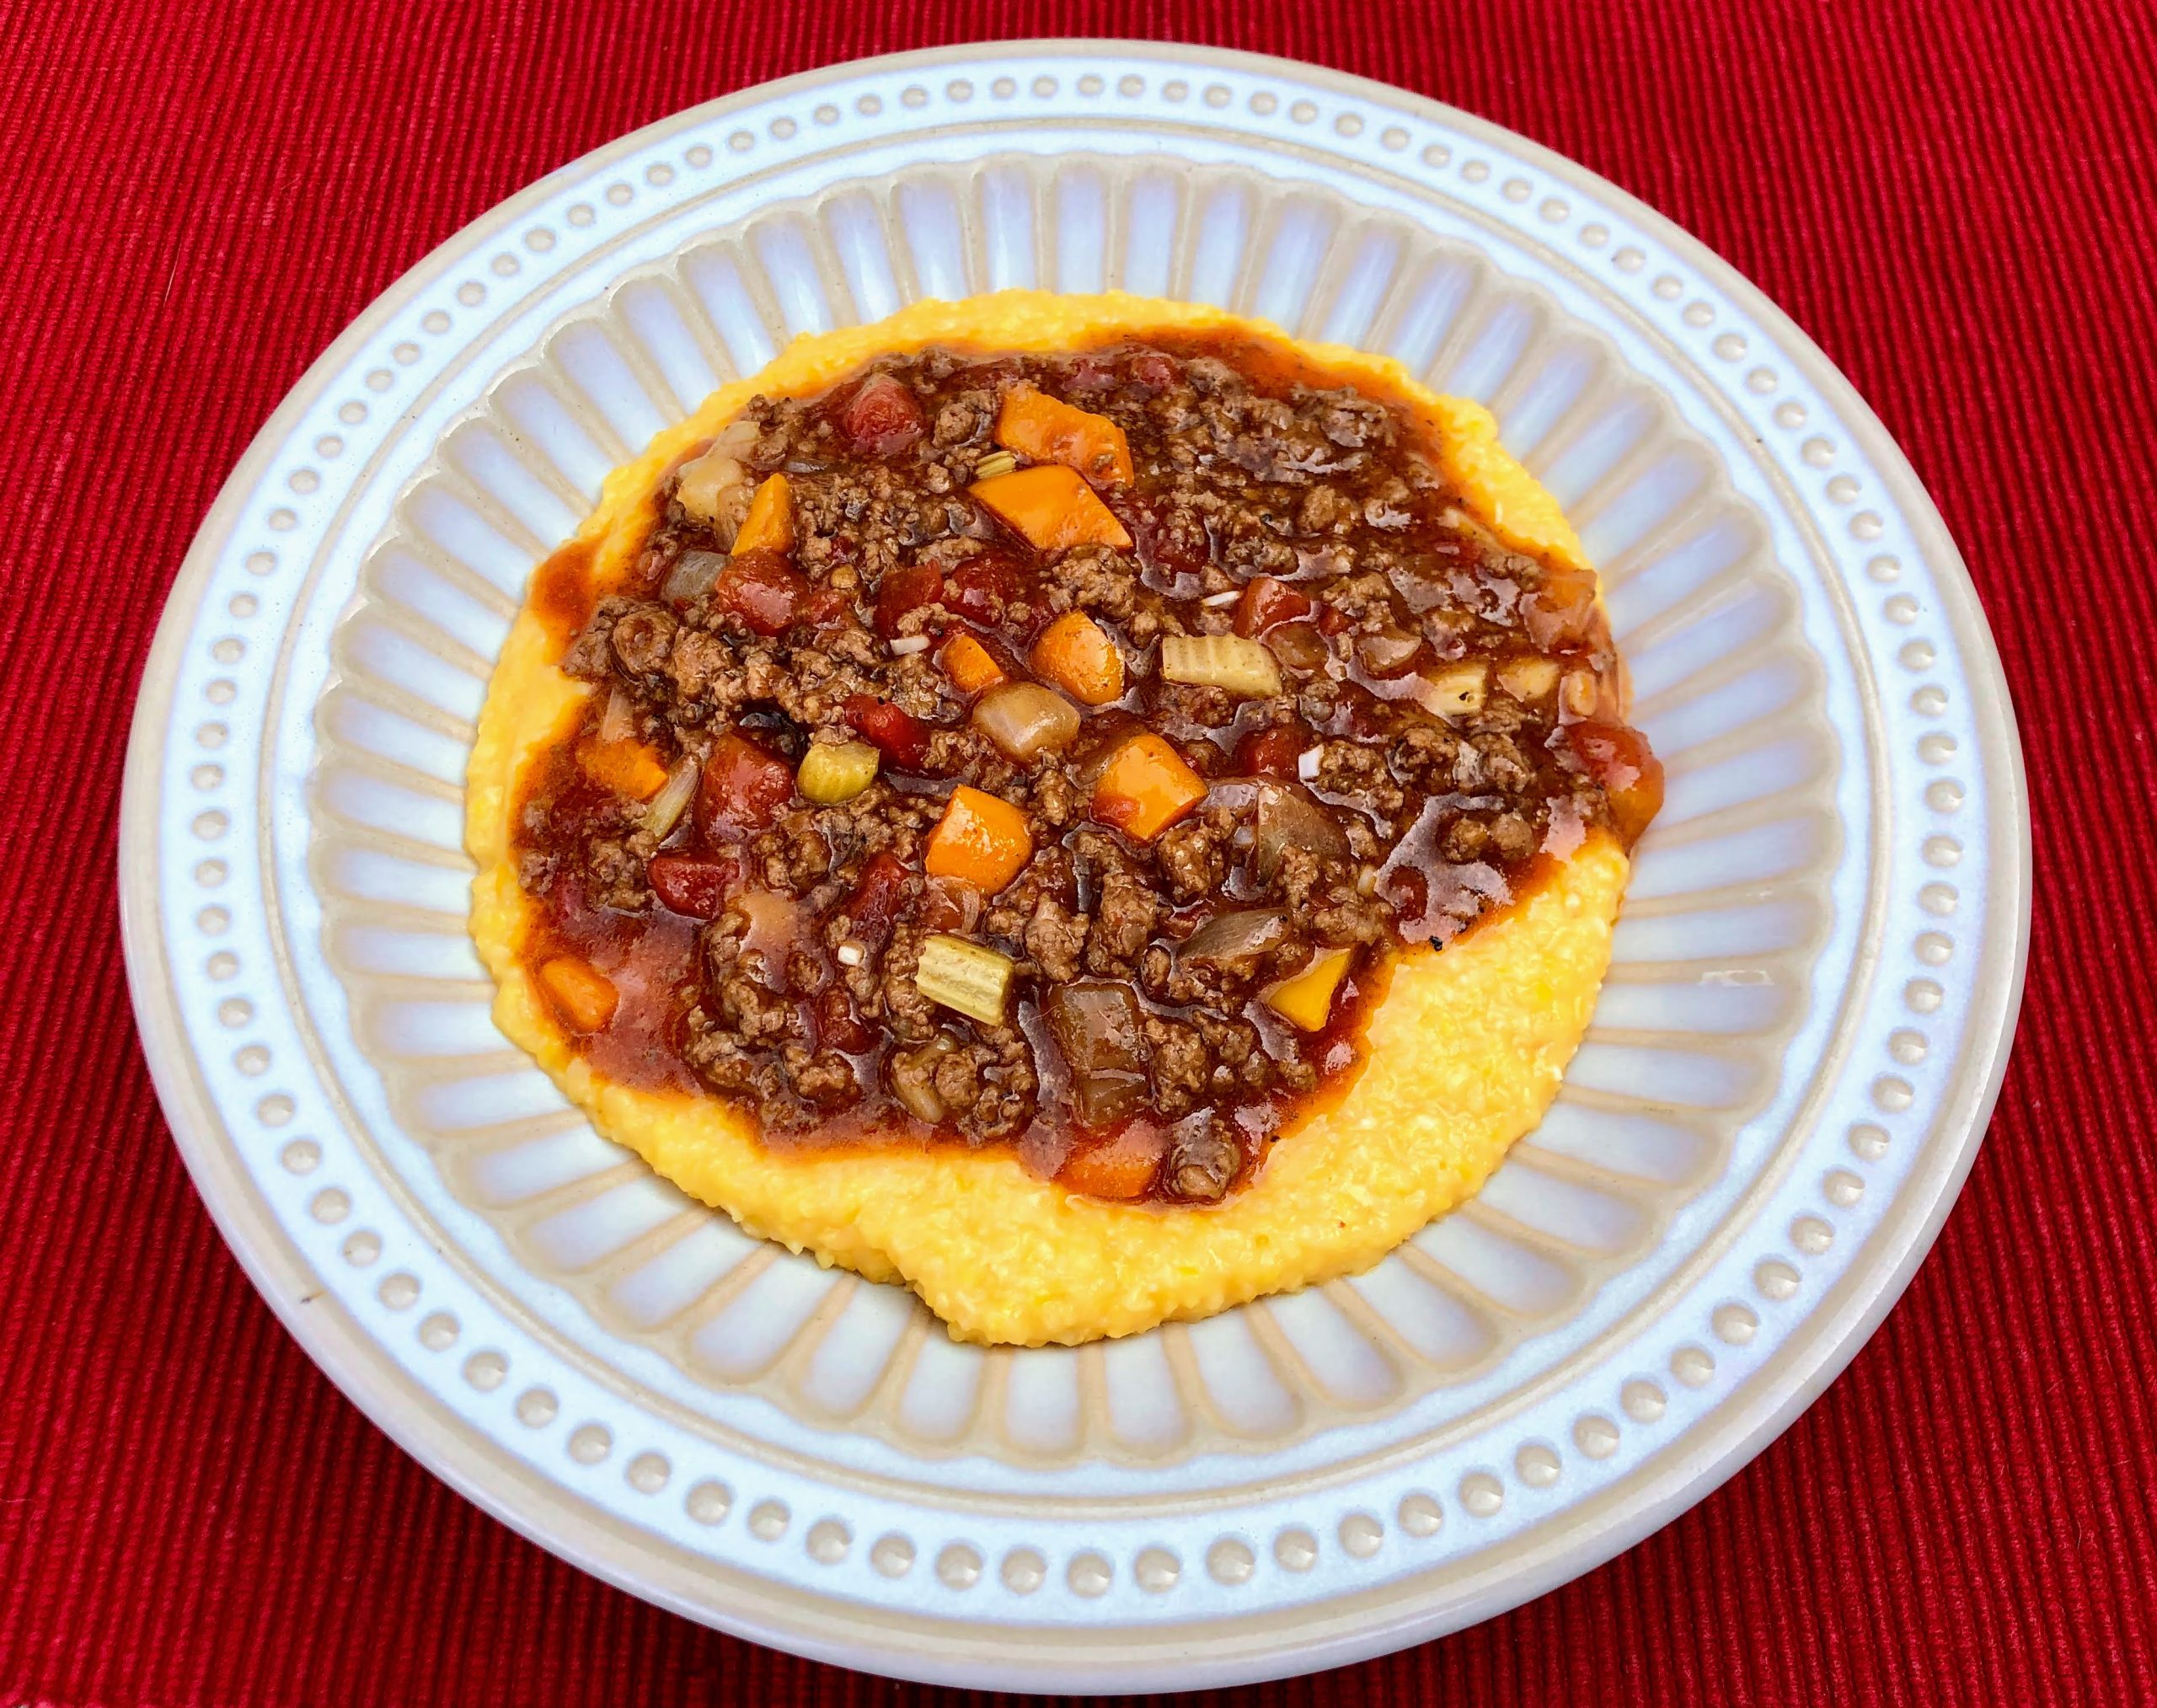 The ONE Beef and Veggies with Cheesy Grits in a white bowl on a red placemat